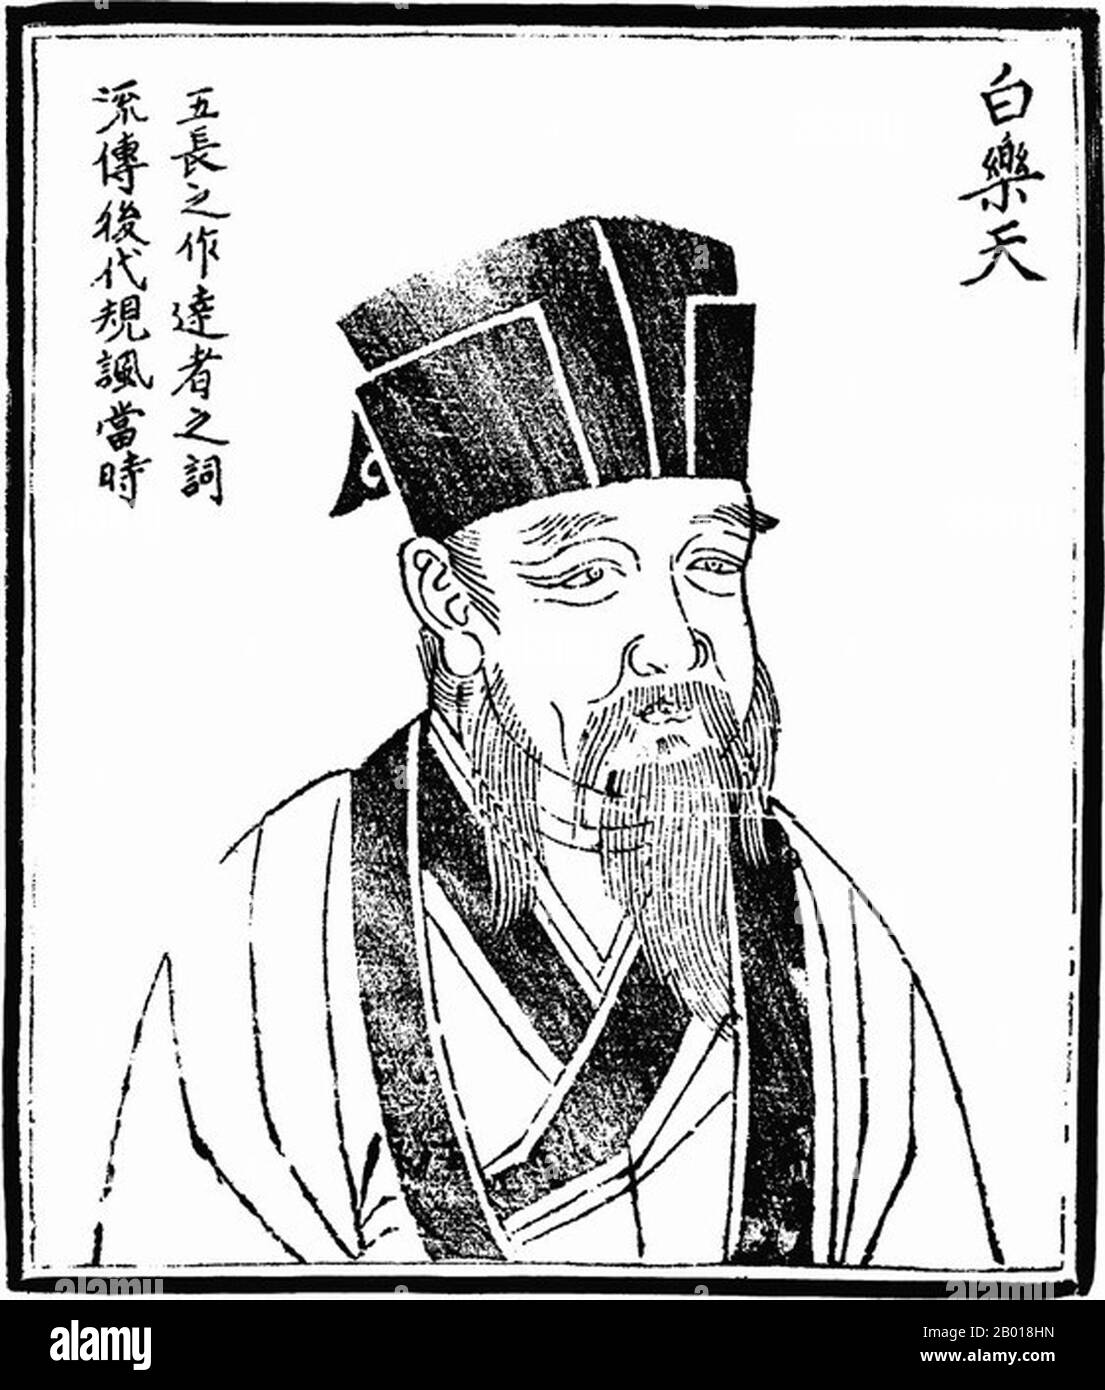 China: Bai Juyi (772-846), celebrated Tang Dynasty (618-907) poet. Woodblock print from 'Images of Ancient People in History', c. 1498.  Bai Juyi, also known as Bo Juyi or Po Chu-i and courtesy name Letian, was a Chinese poet of the Tang dynasty. His poems mostly concern his responsibilities as governor of several small provinces. He is also renowned in Japan, where his name is read Haku Kyo'i. Bai Juyi was born in Xinzheng to a poor but scholarly family. At the age of ten he was sent away from his family to avoid a war that broke out in the north of China, and went to live with relatives. Stock Photo